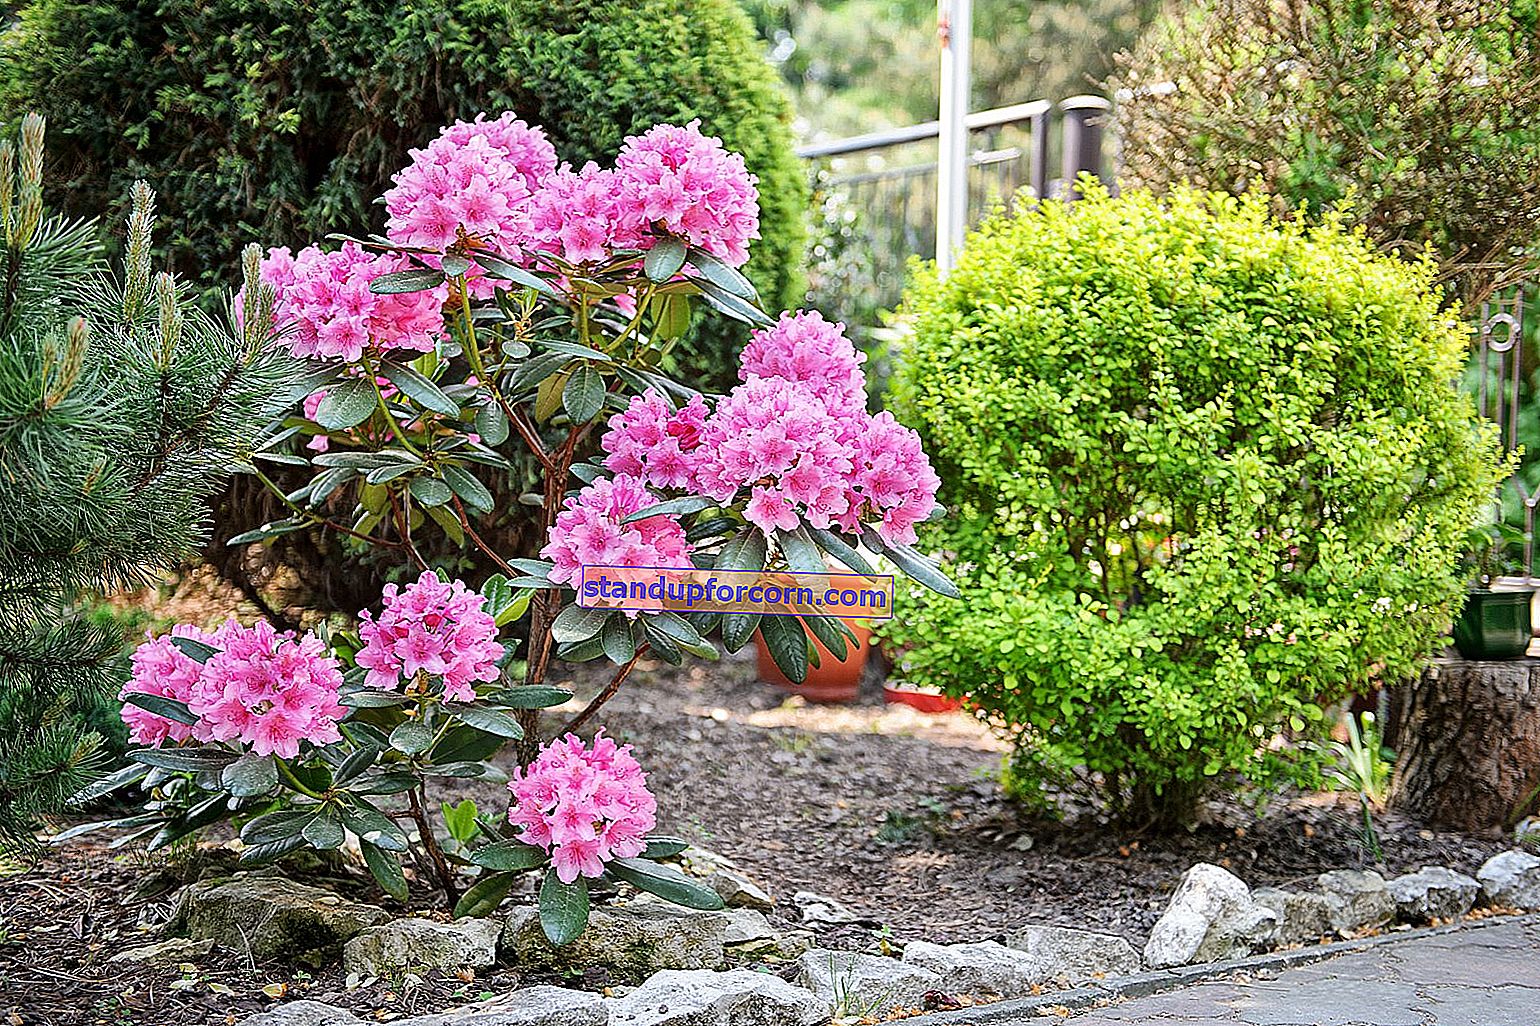 Rhododendron, rhododendron - dyrkning, pleje, reproduktion